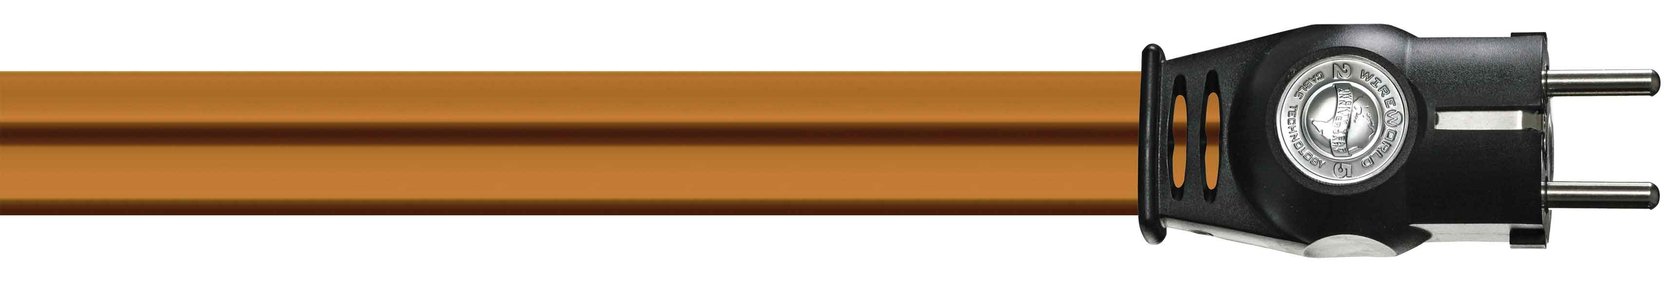 WireWorld Electra 7 power cable